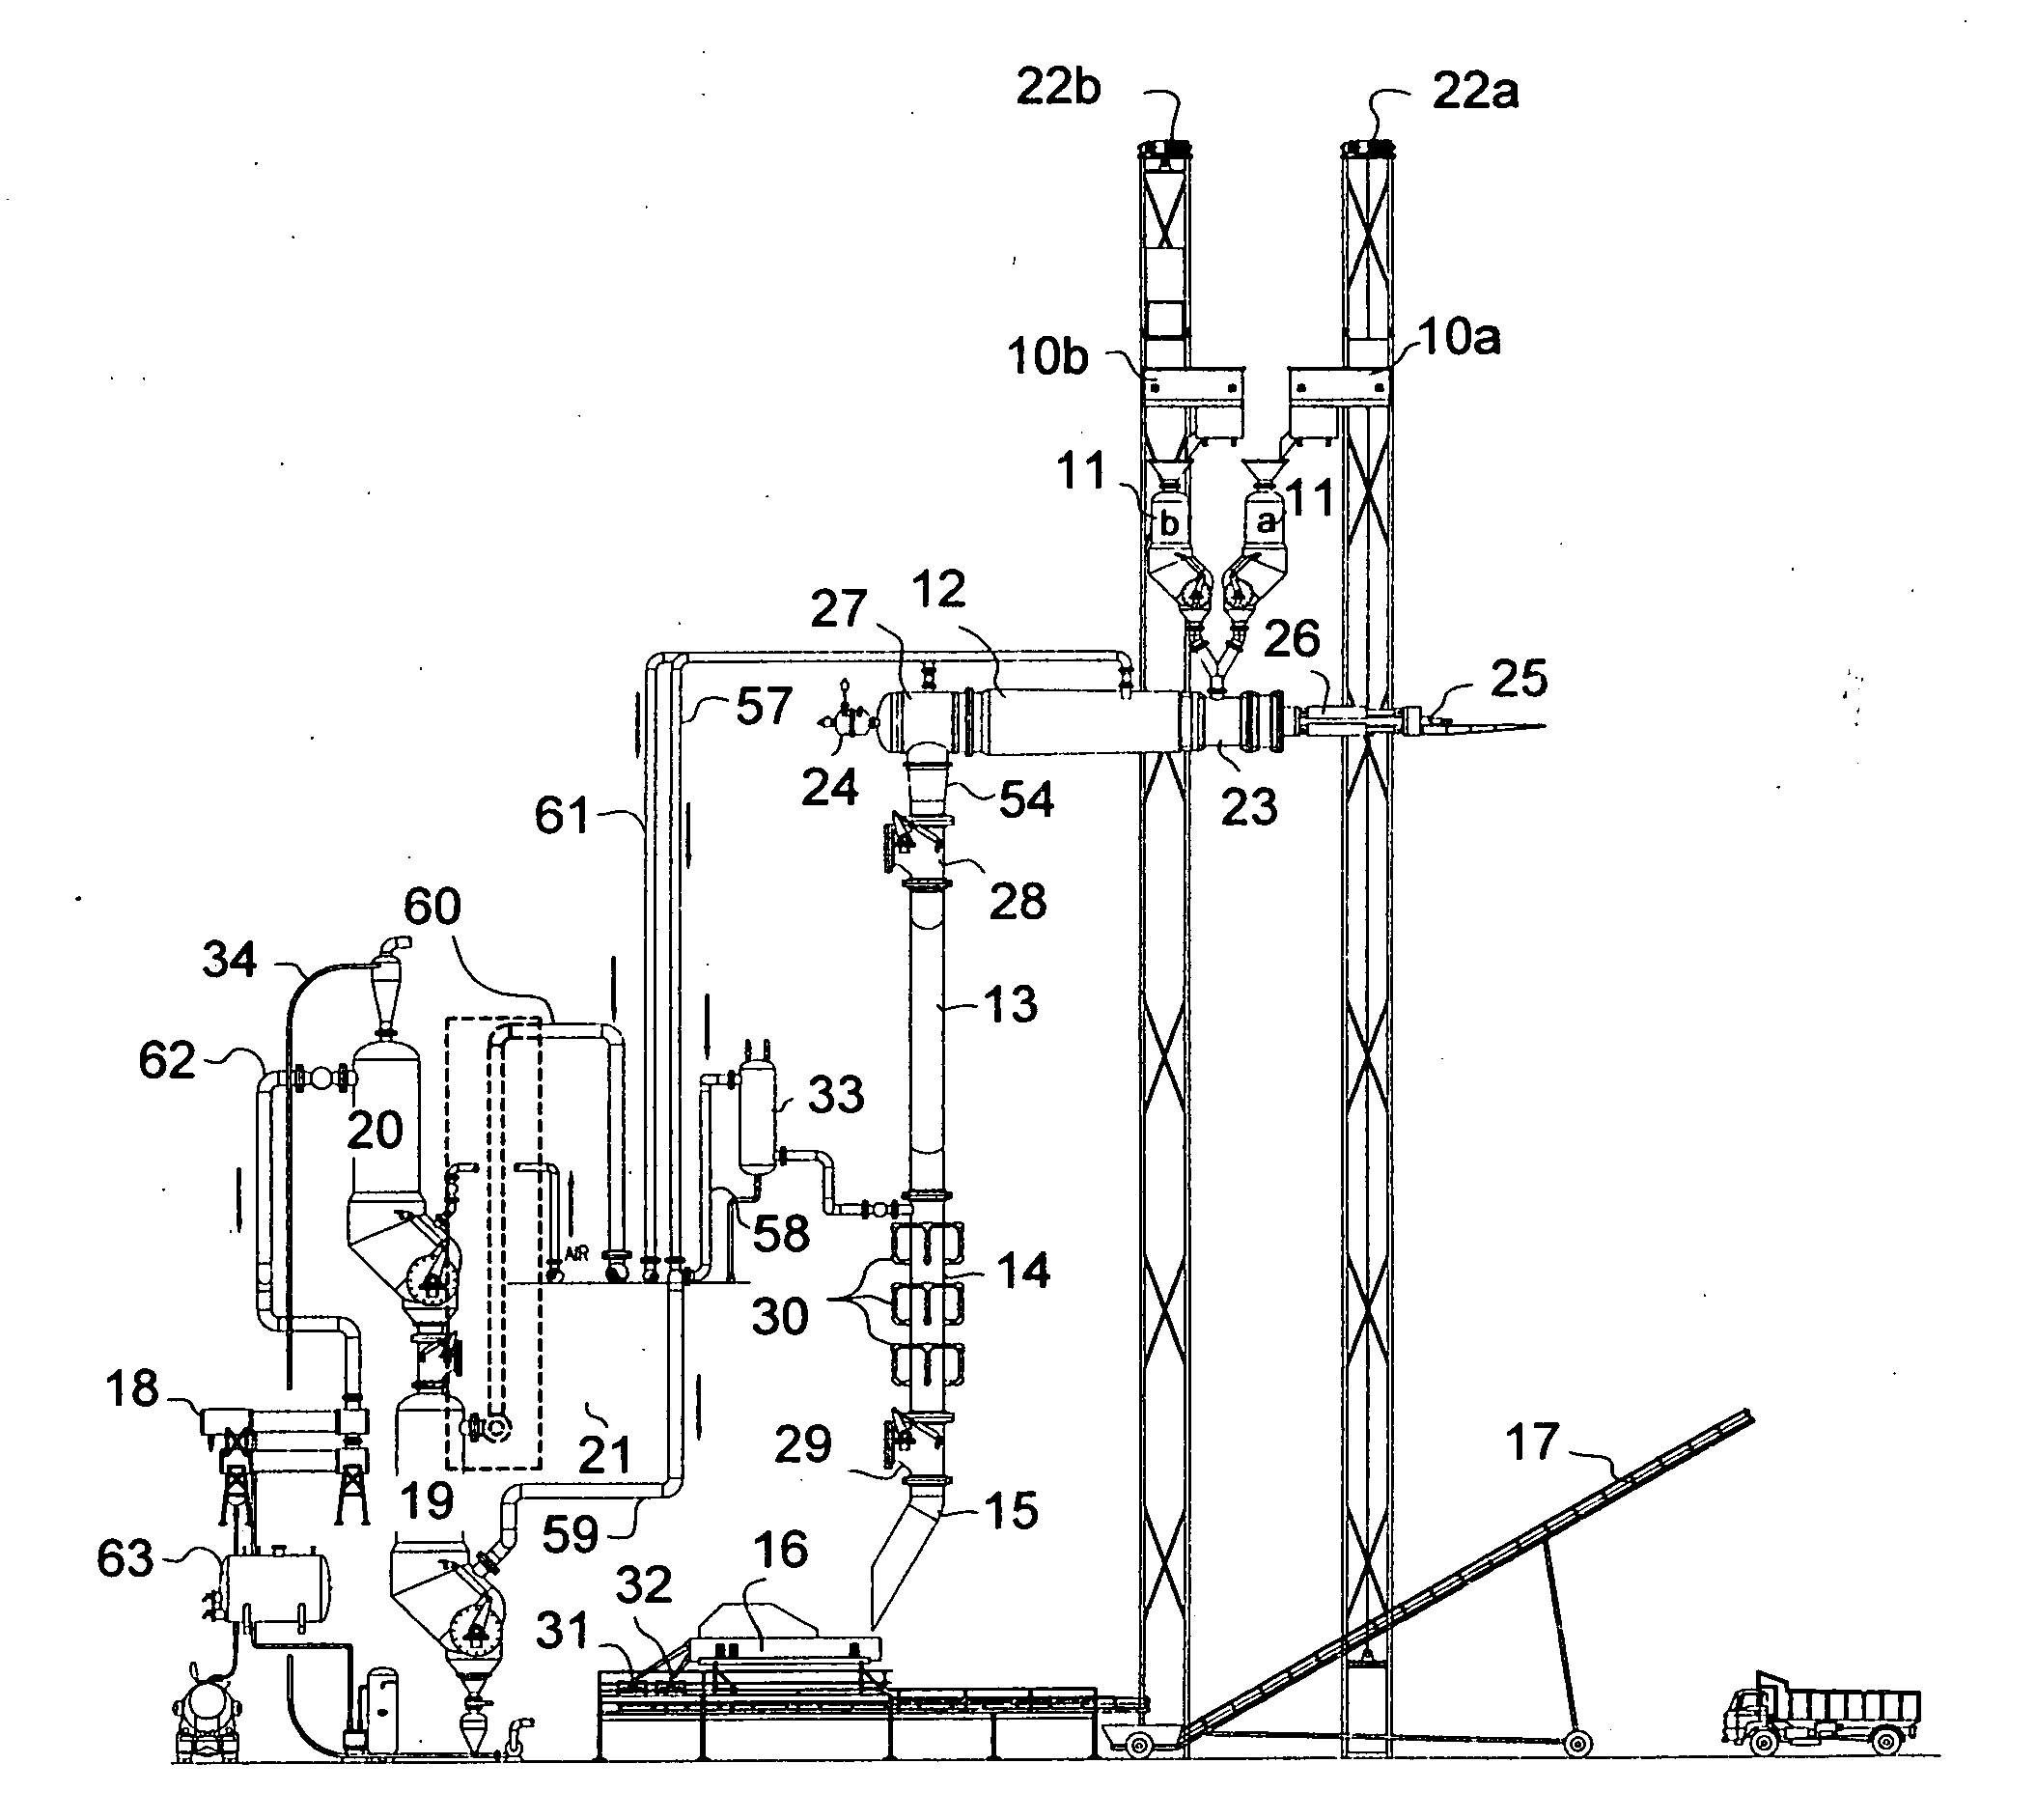 Method and apparatus for continuously carbonizing materials